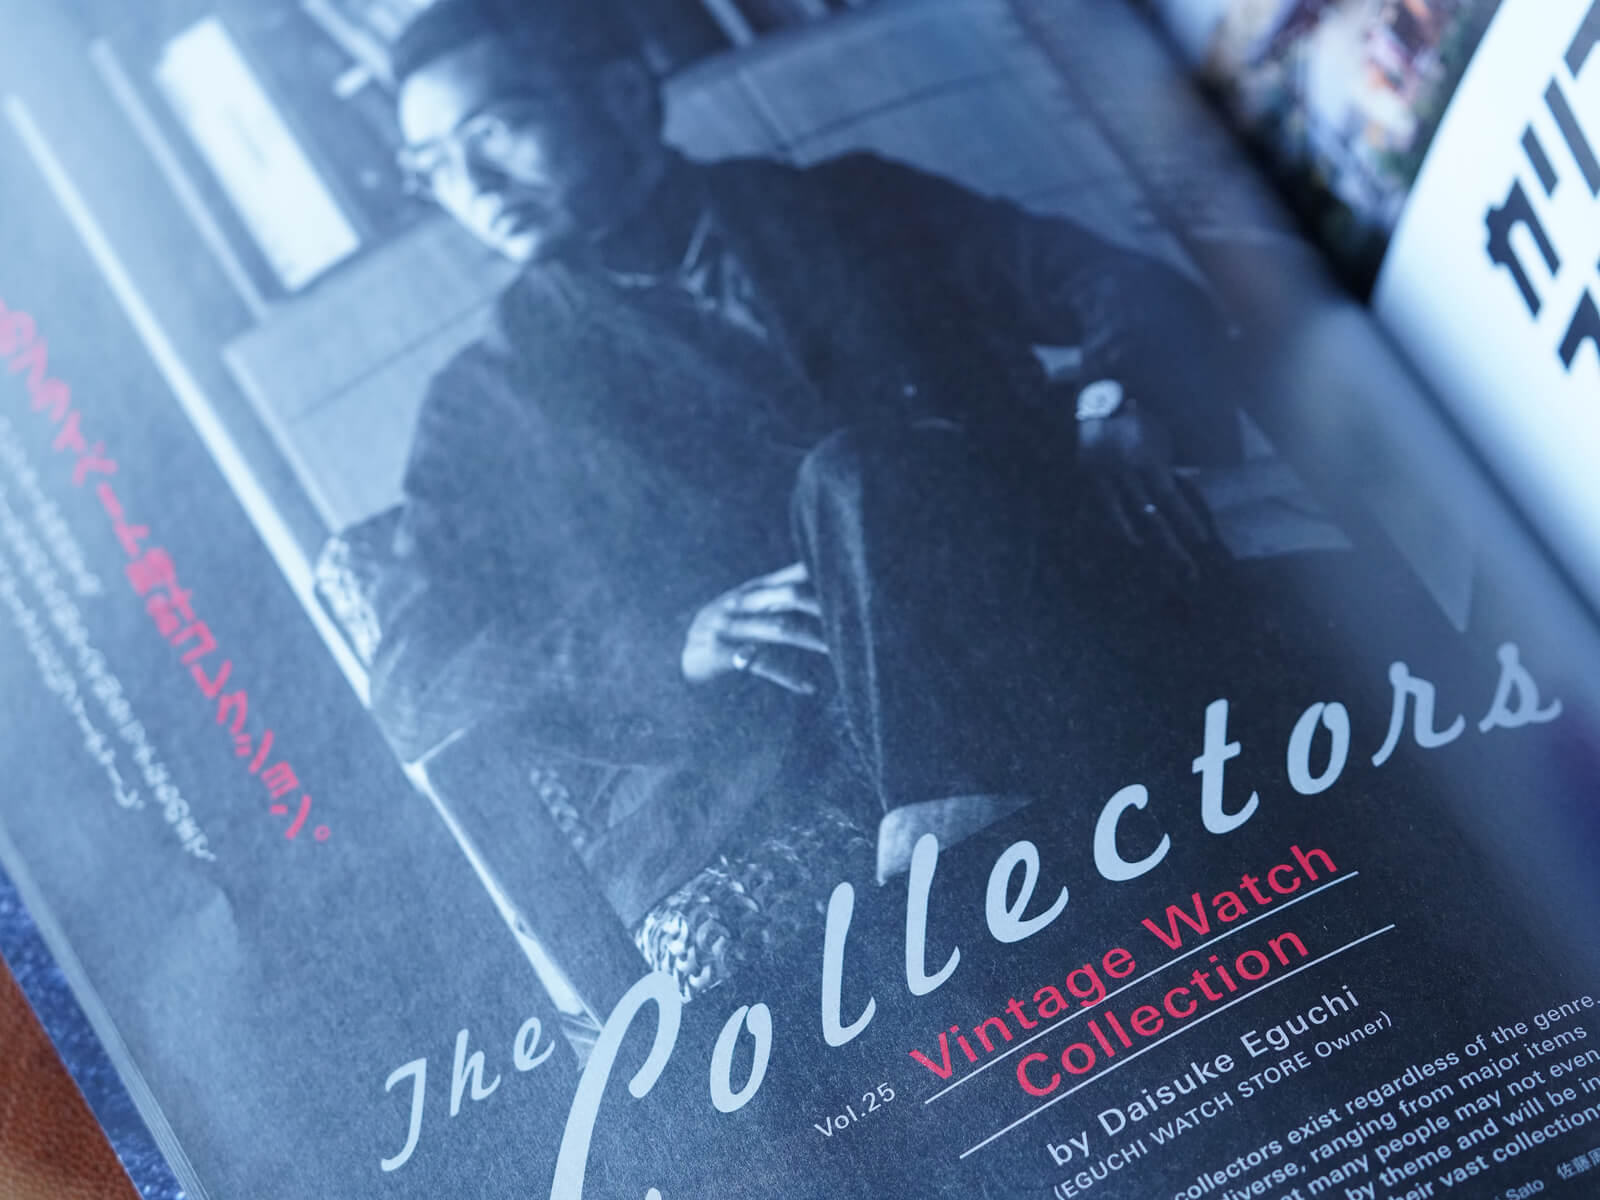 CLUTCH Vol.84 4月号　PORTRAITS OF CLUTCHMAN クラッチマン、世界から。/The Collectors Vintage Watch Collection編